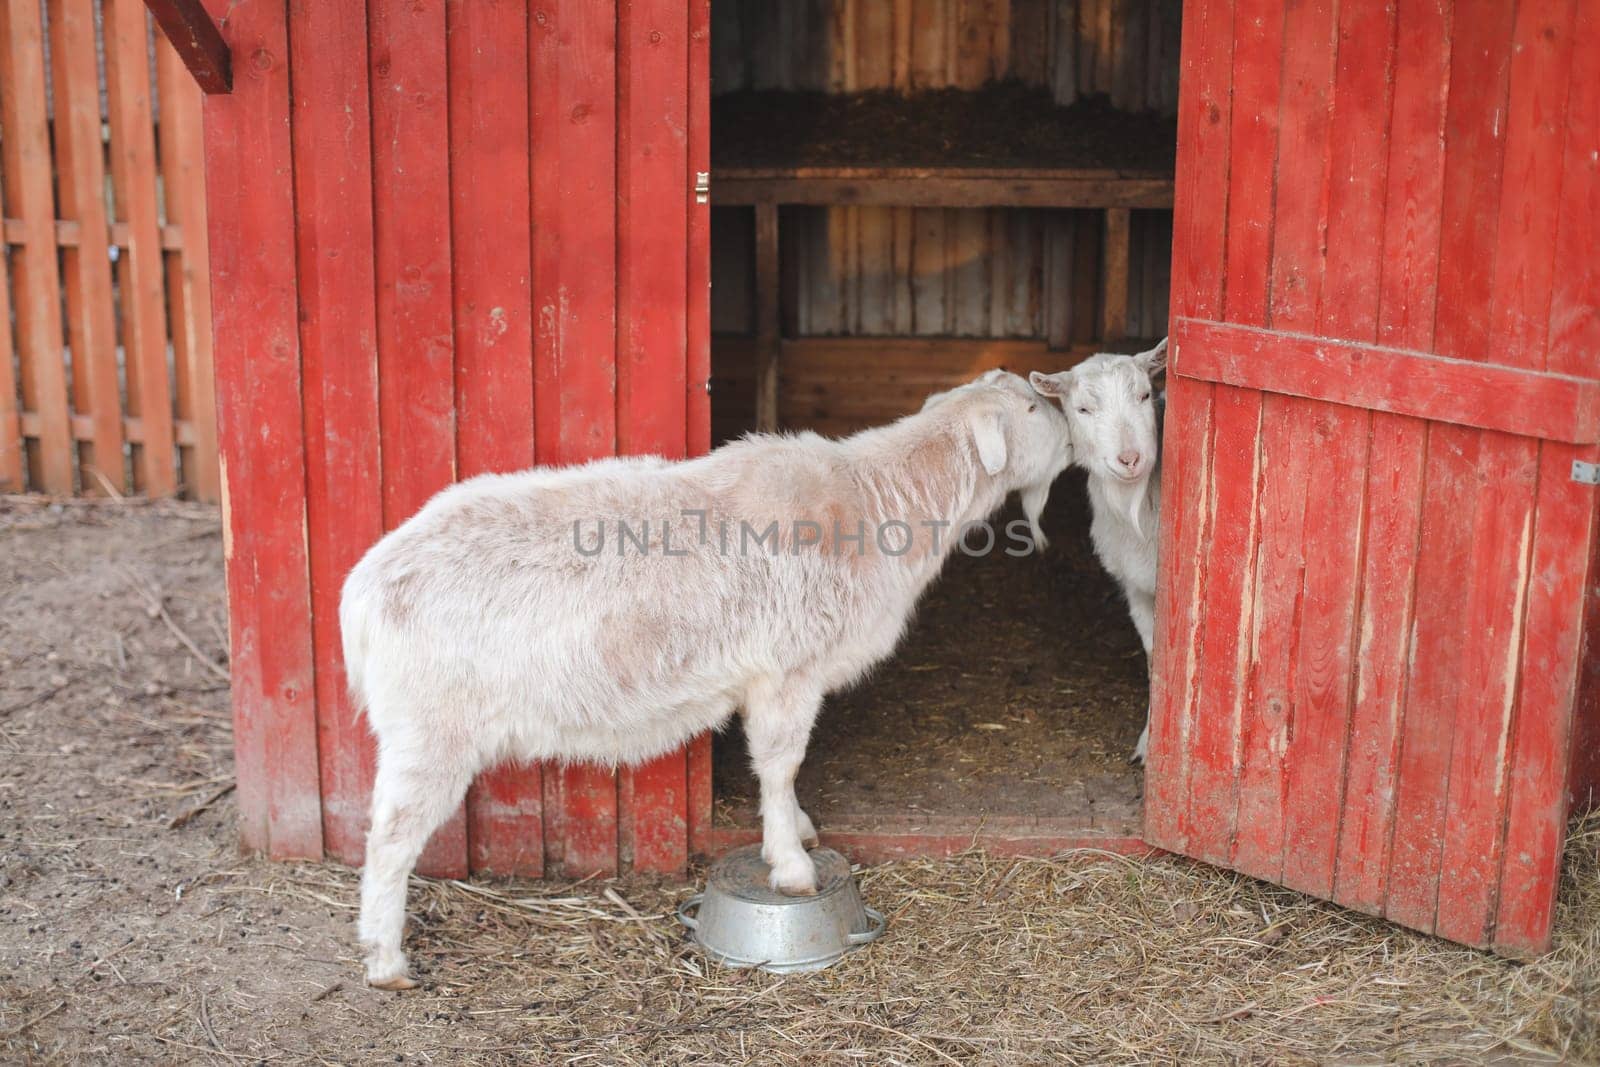 Lovely couple of two goats standing in wooden shelter. funny cozy sweet lovely tender goats, one leaning on the other, outdoor wildlife portrait of couple, symbolic love tenderness trust support. by paralisart